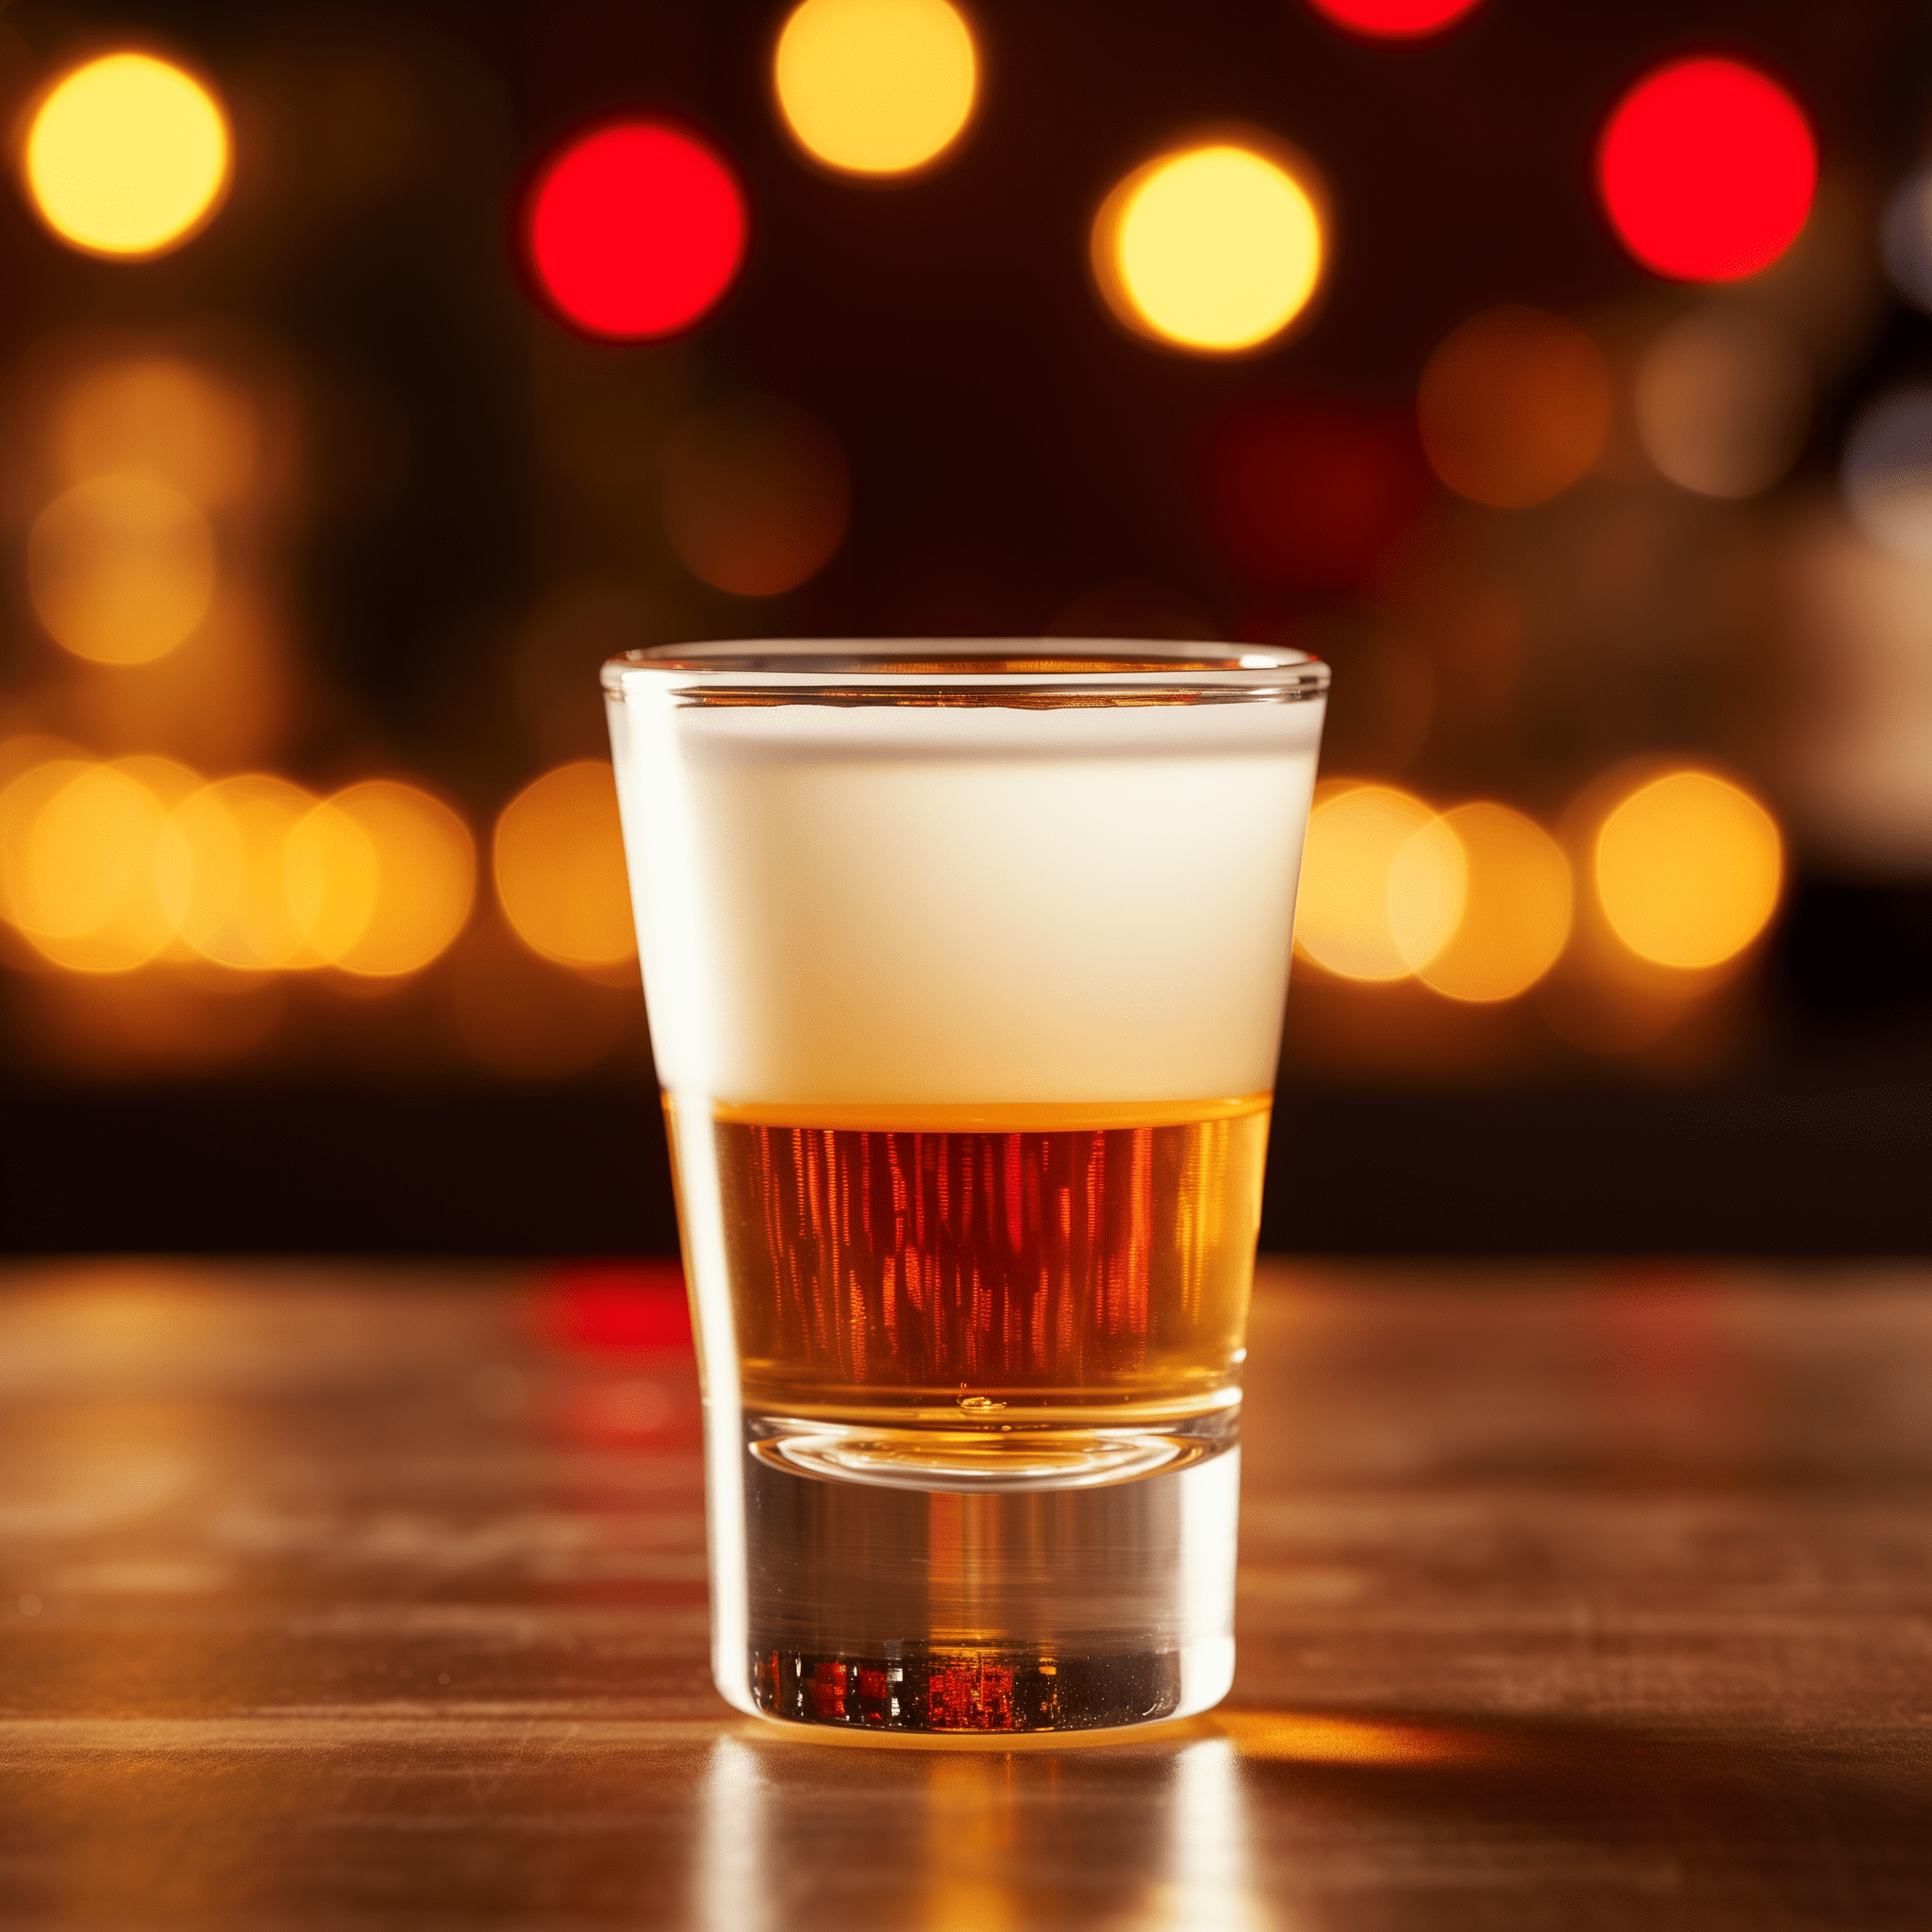 Sparkplug Recipe - The Sparkplug shot is a powerful, fiery concoction. The overproof rum provides a strong, warming alcohol base, while the peppermint liqueur adds a sharp, refreshing minty kick. It's intense and not for the faint of heart.